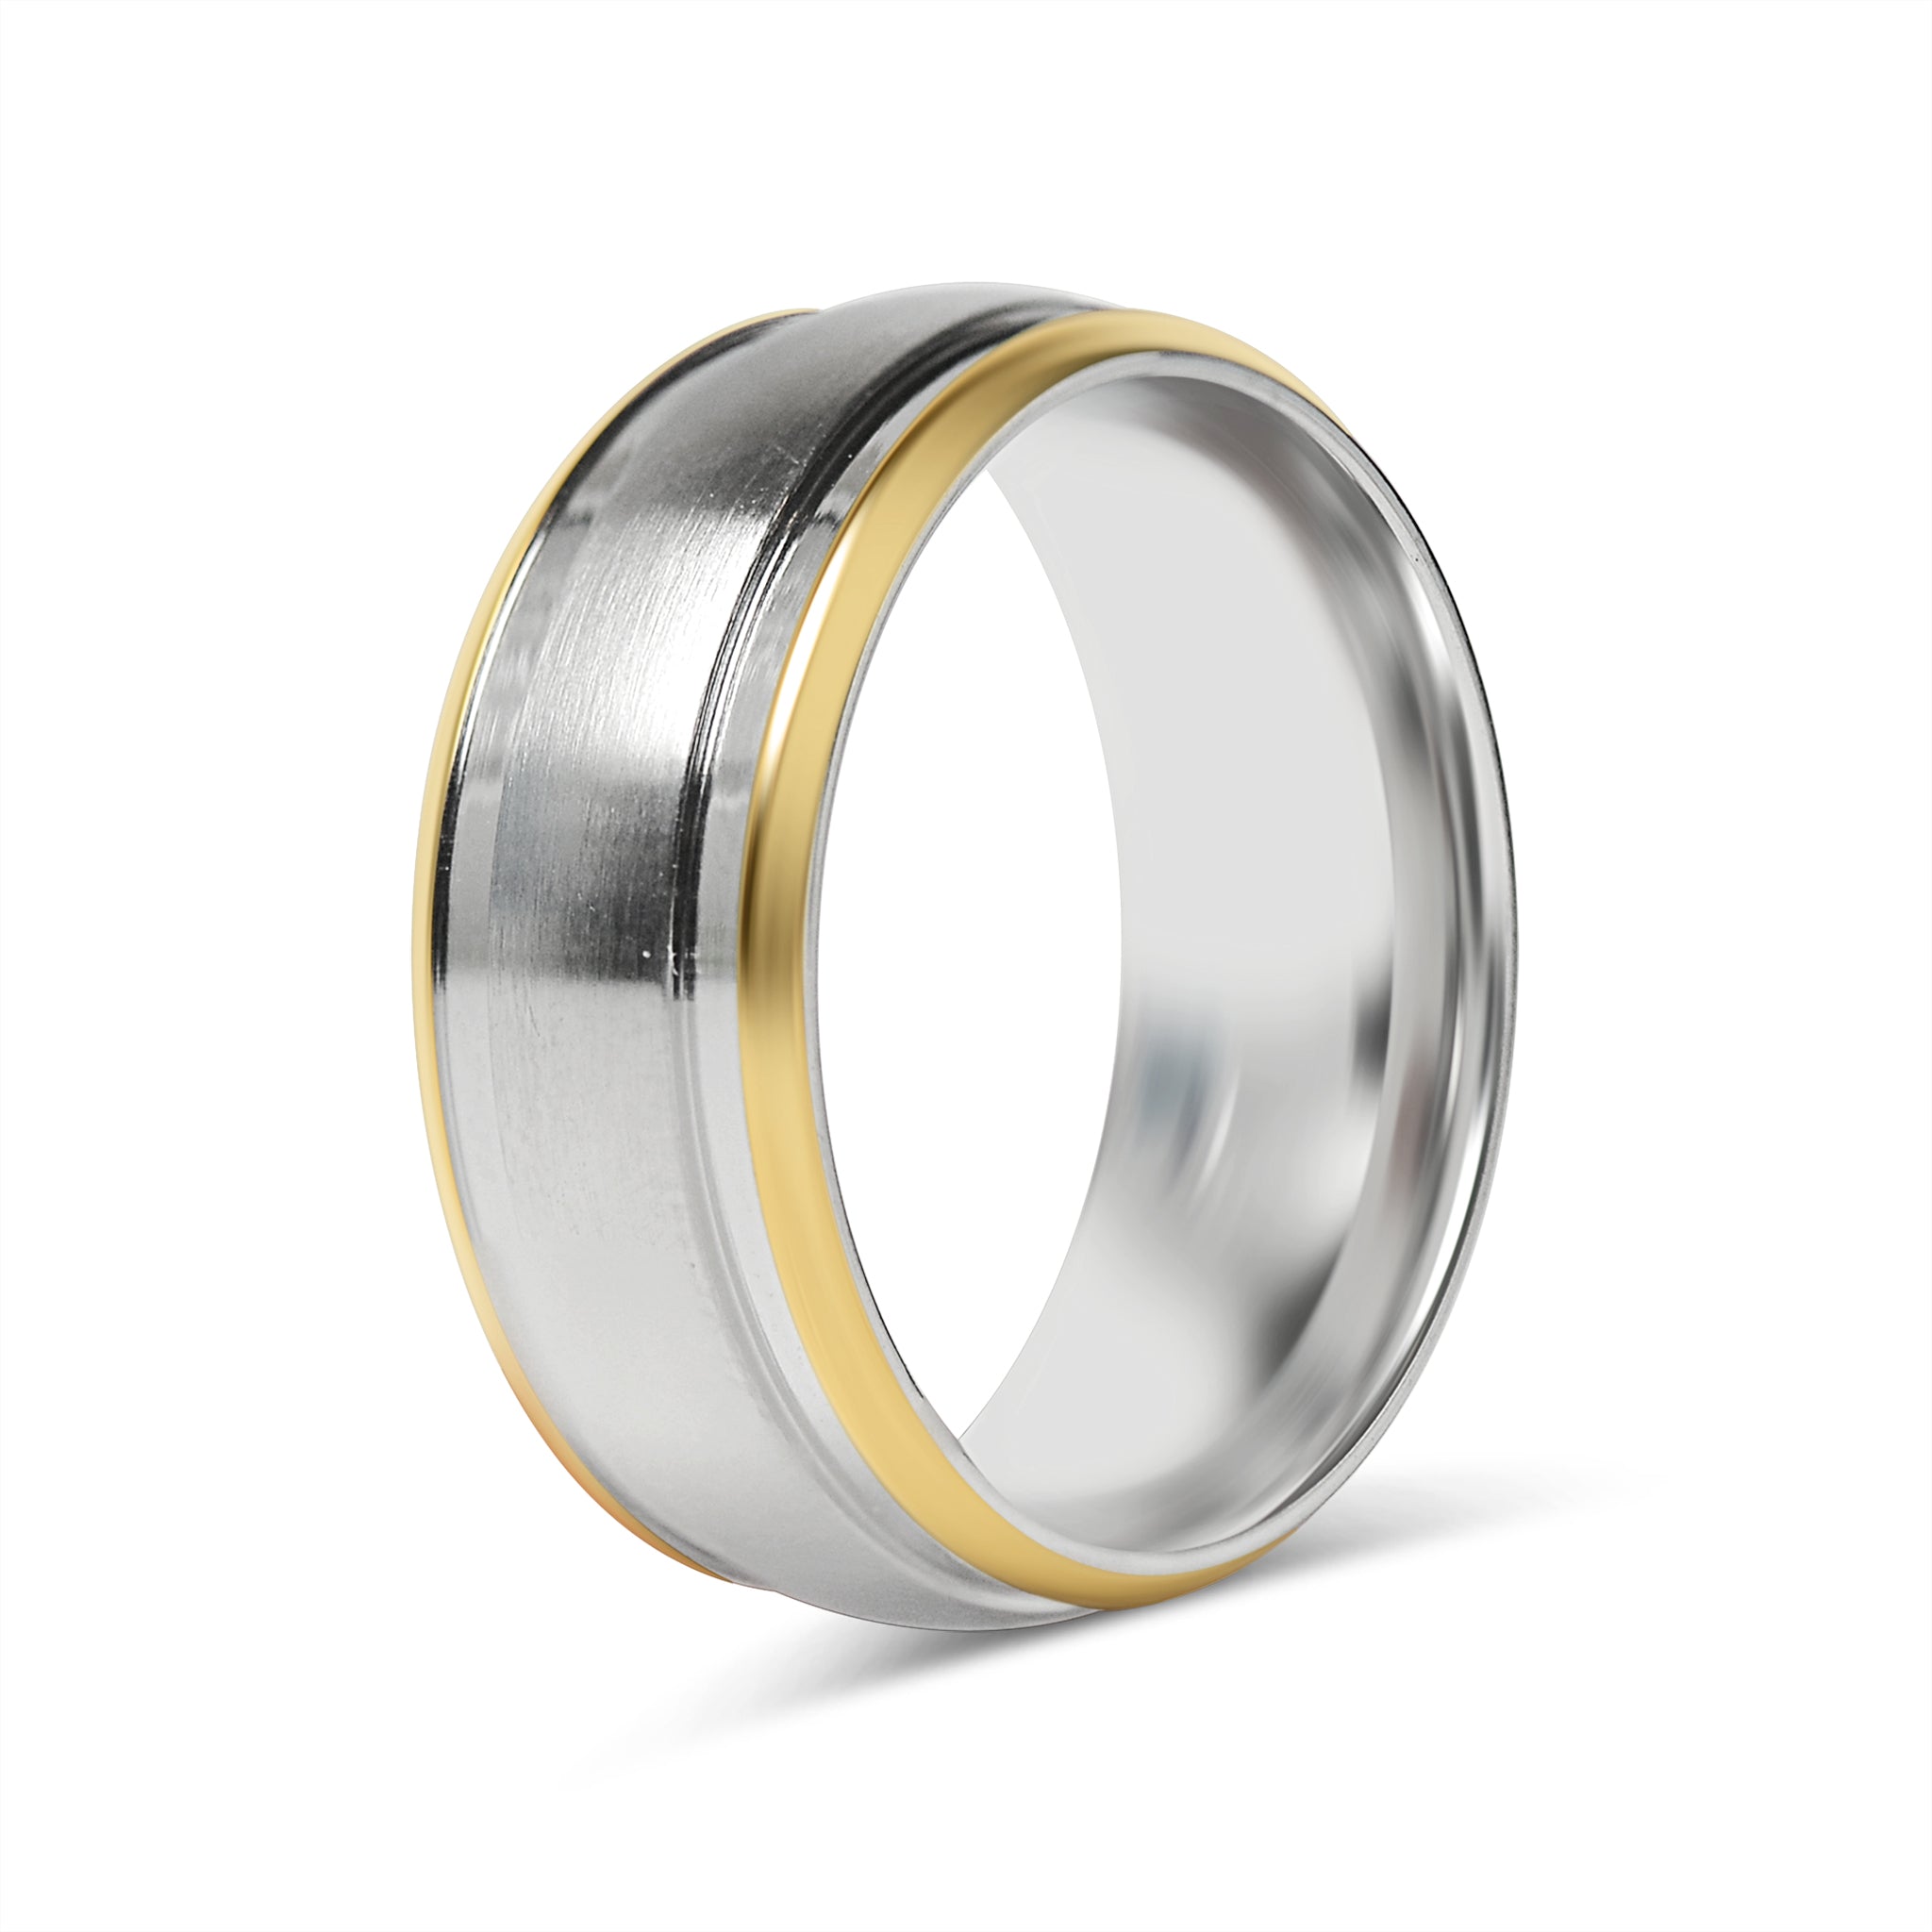 GOLD Double Trim Brushed Center Stainless Steel Ring / CFR7019